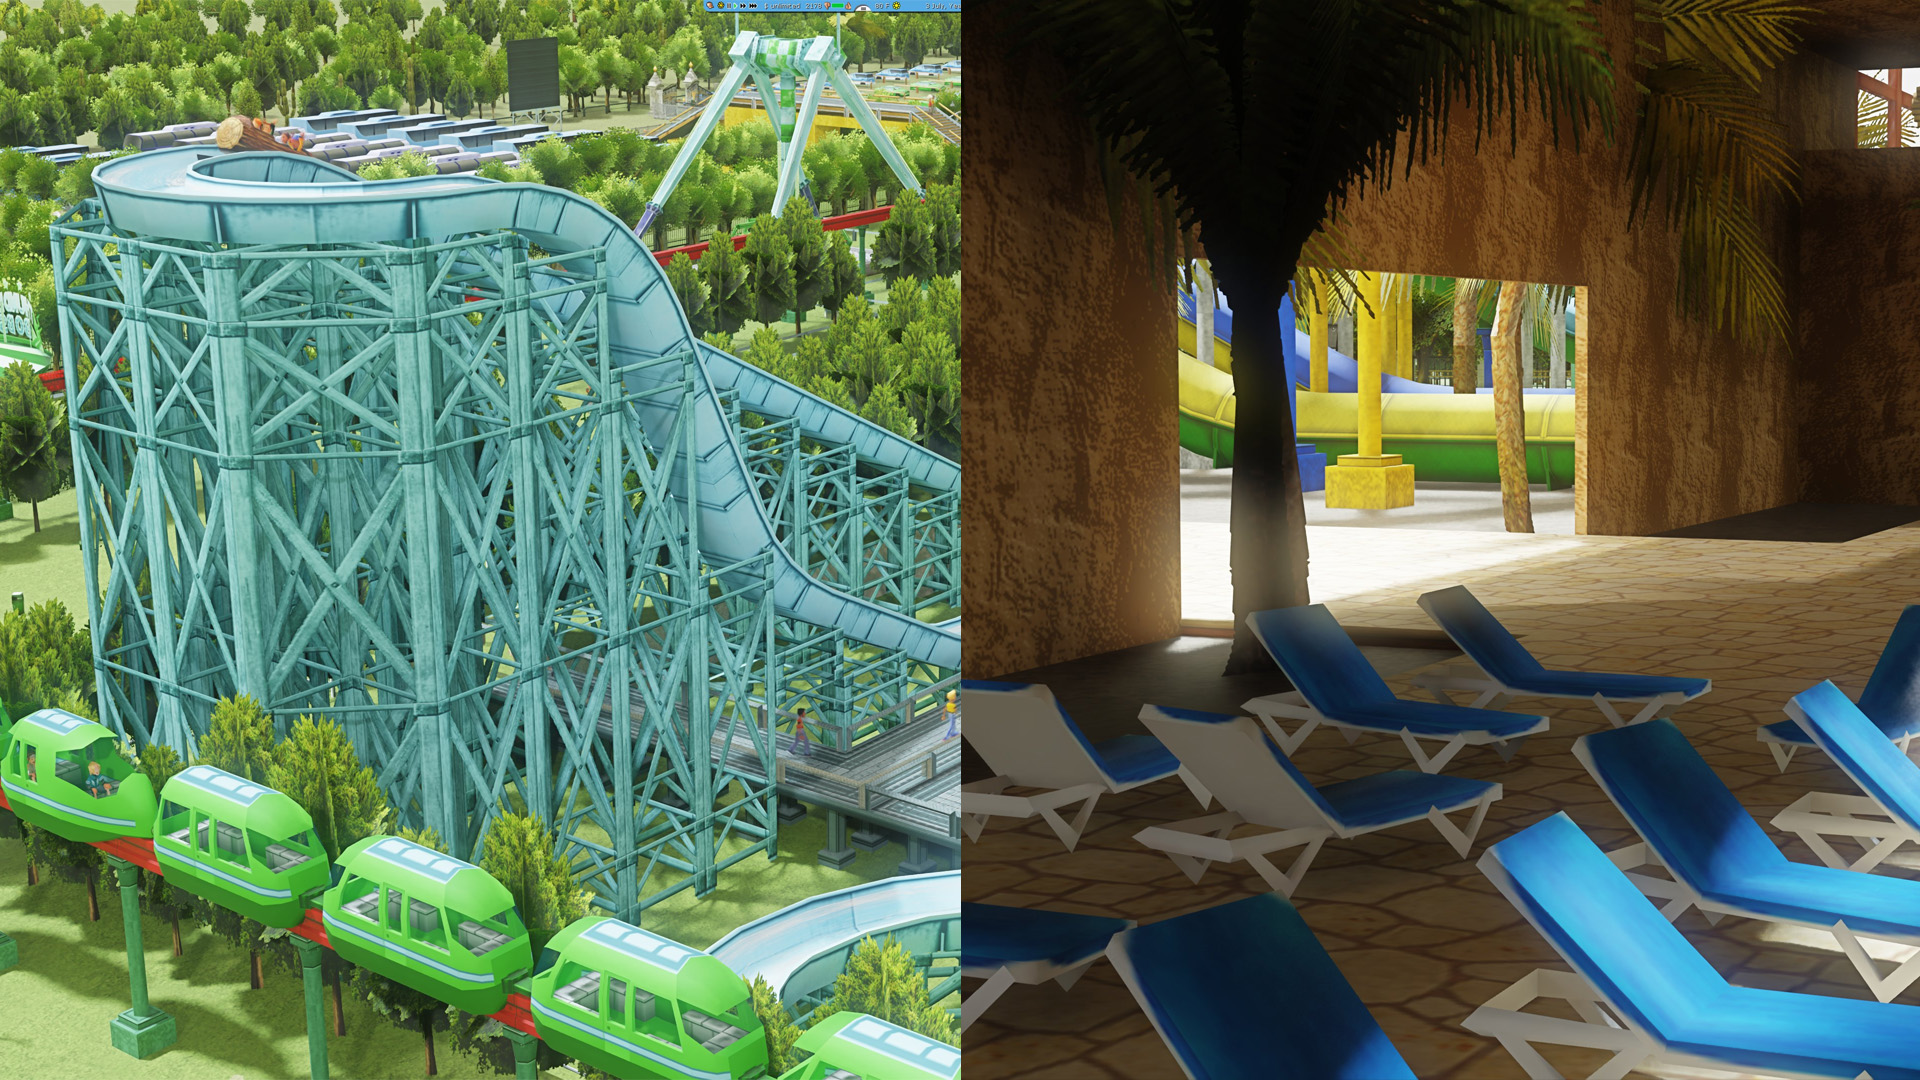 RollerCoaster Tycoon 3 looks stunning in new Nvidia ray tracing mod